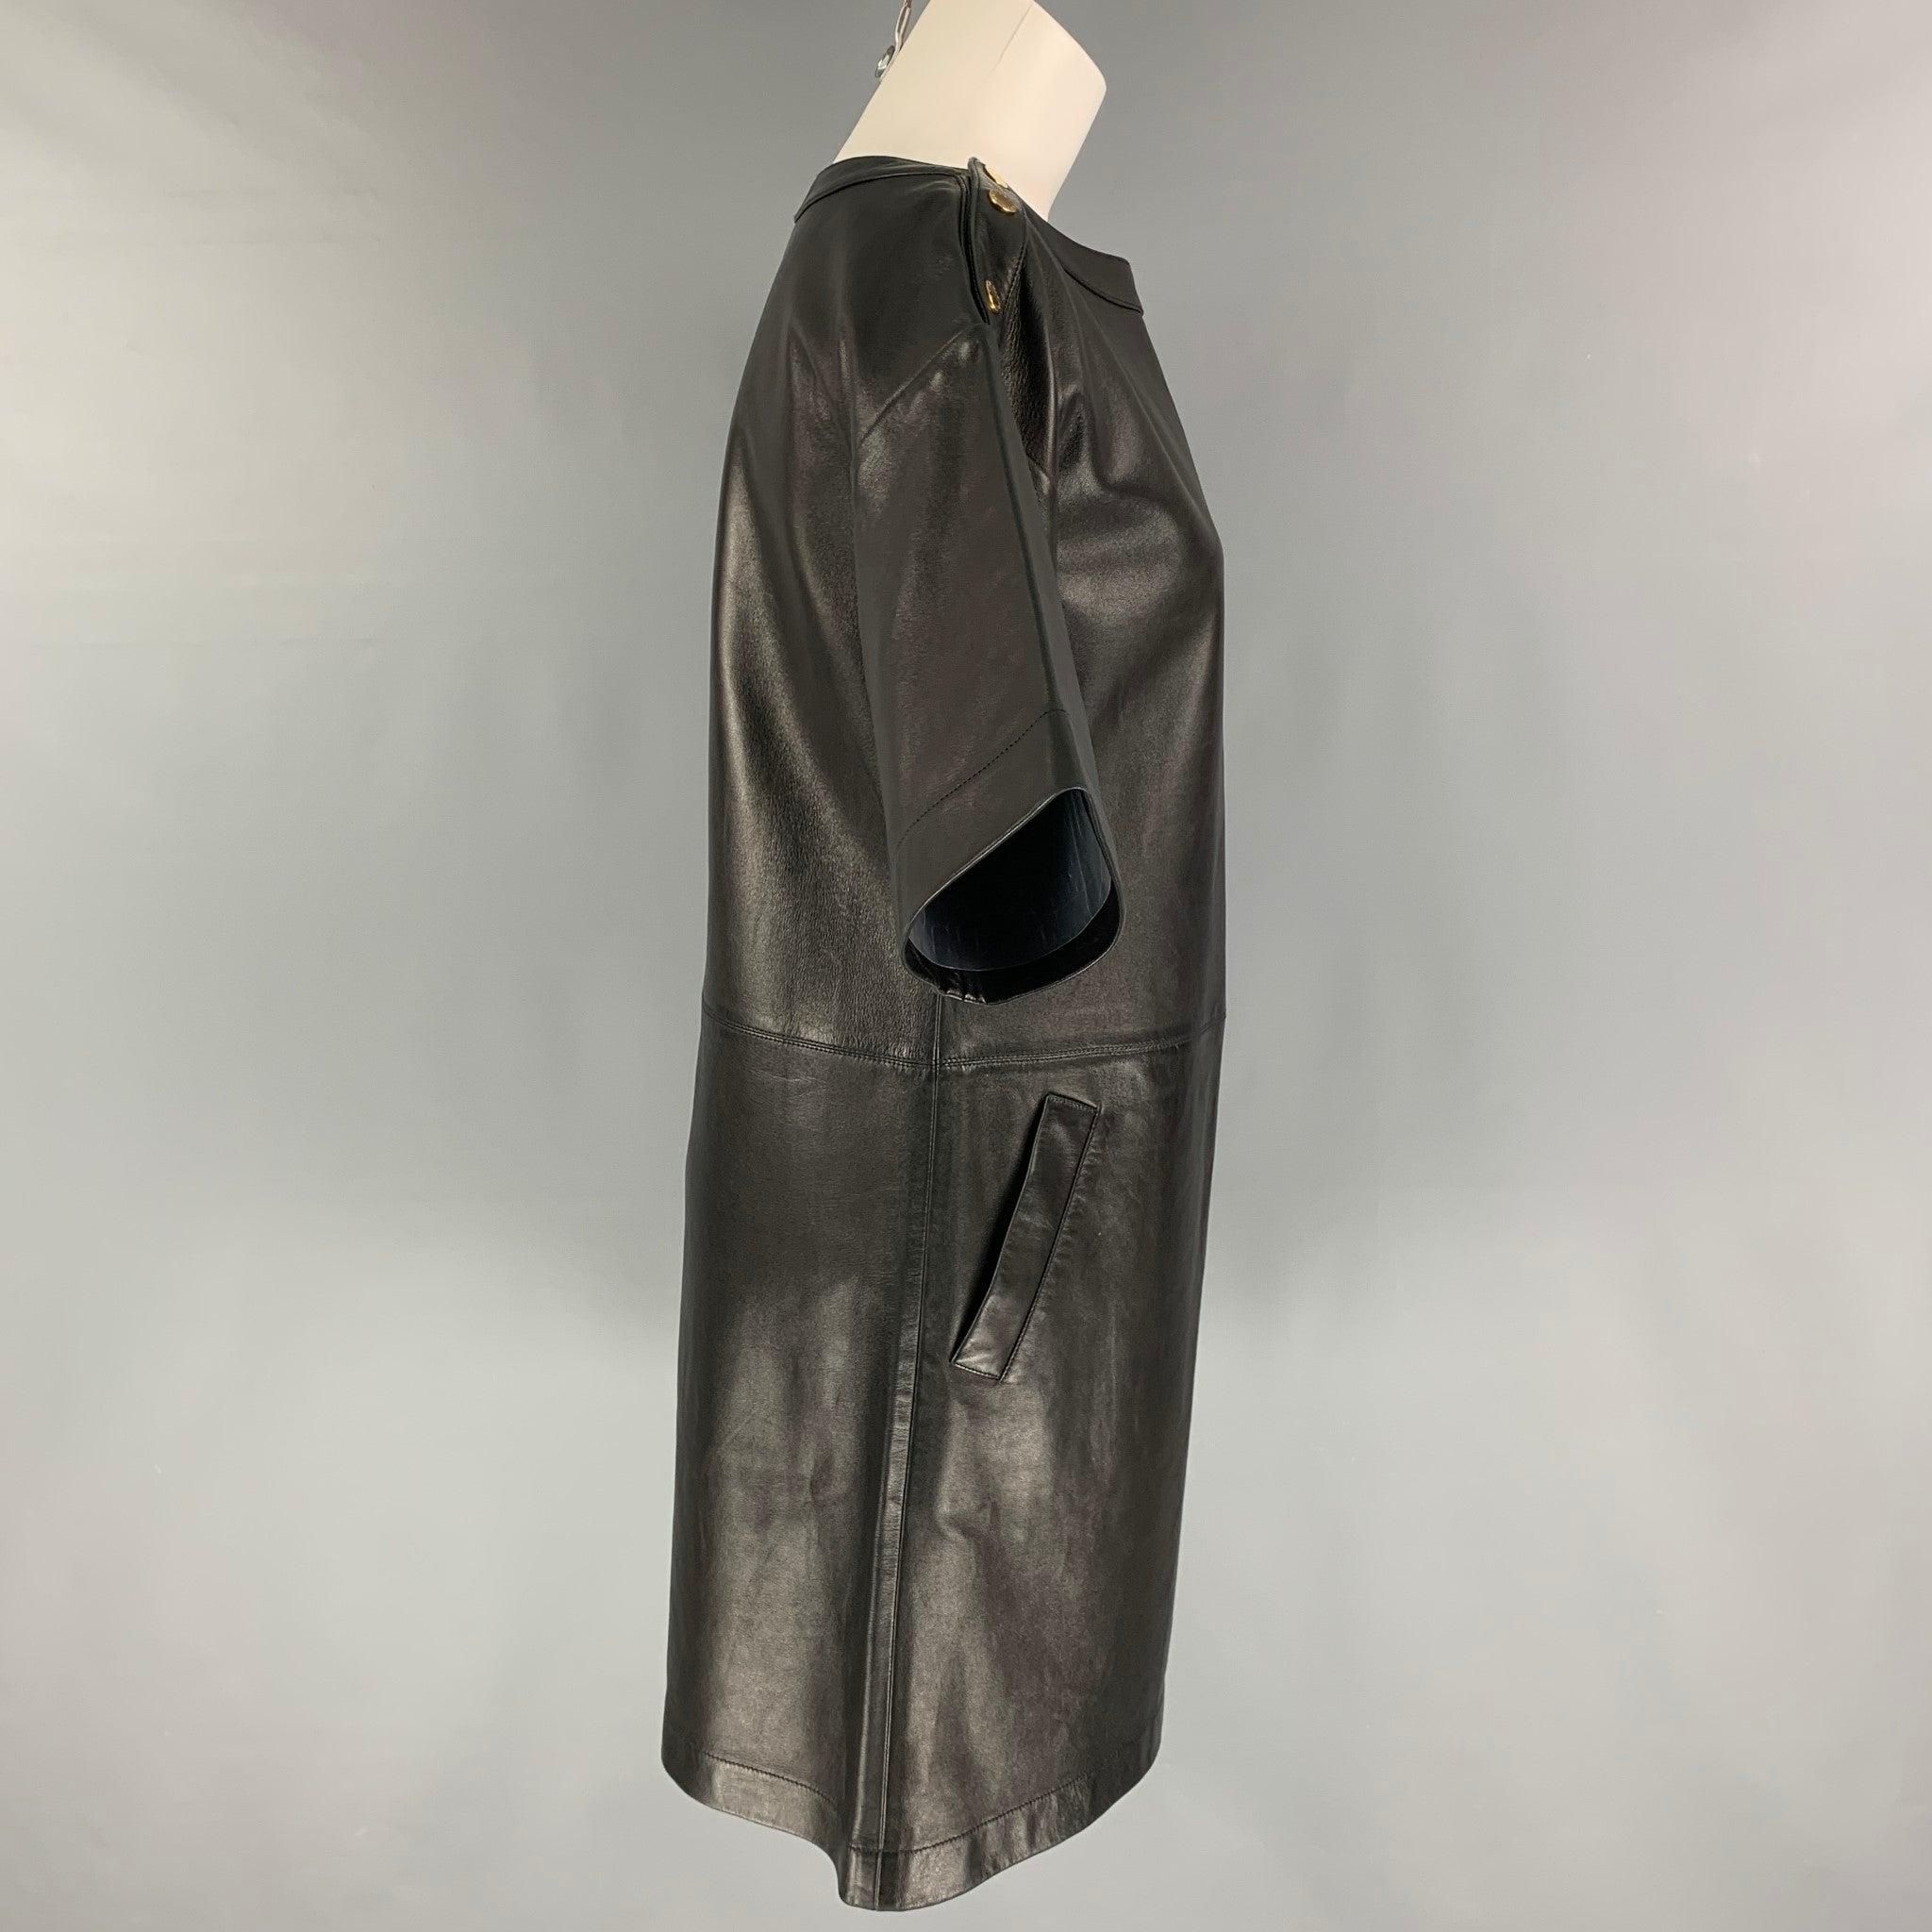 MICHAEL KORS dress comes in a black leather featuring short sleeves, slit pockets, and gold tone shoulder snap buttons. Made in Italy.
Very Good
Pre-Owned Condition. 

Marked:   4 

Measurements: 
 
Shoulder: 21 inches  Bust: 38 inches  Waist: 36